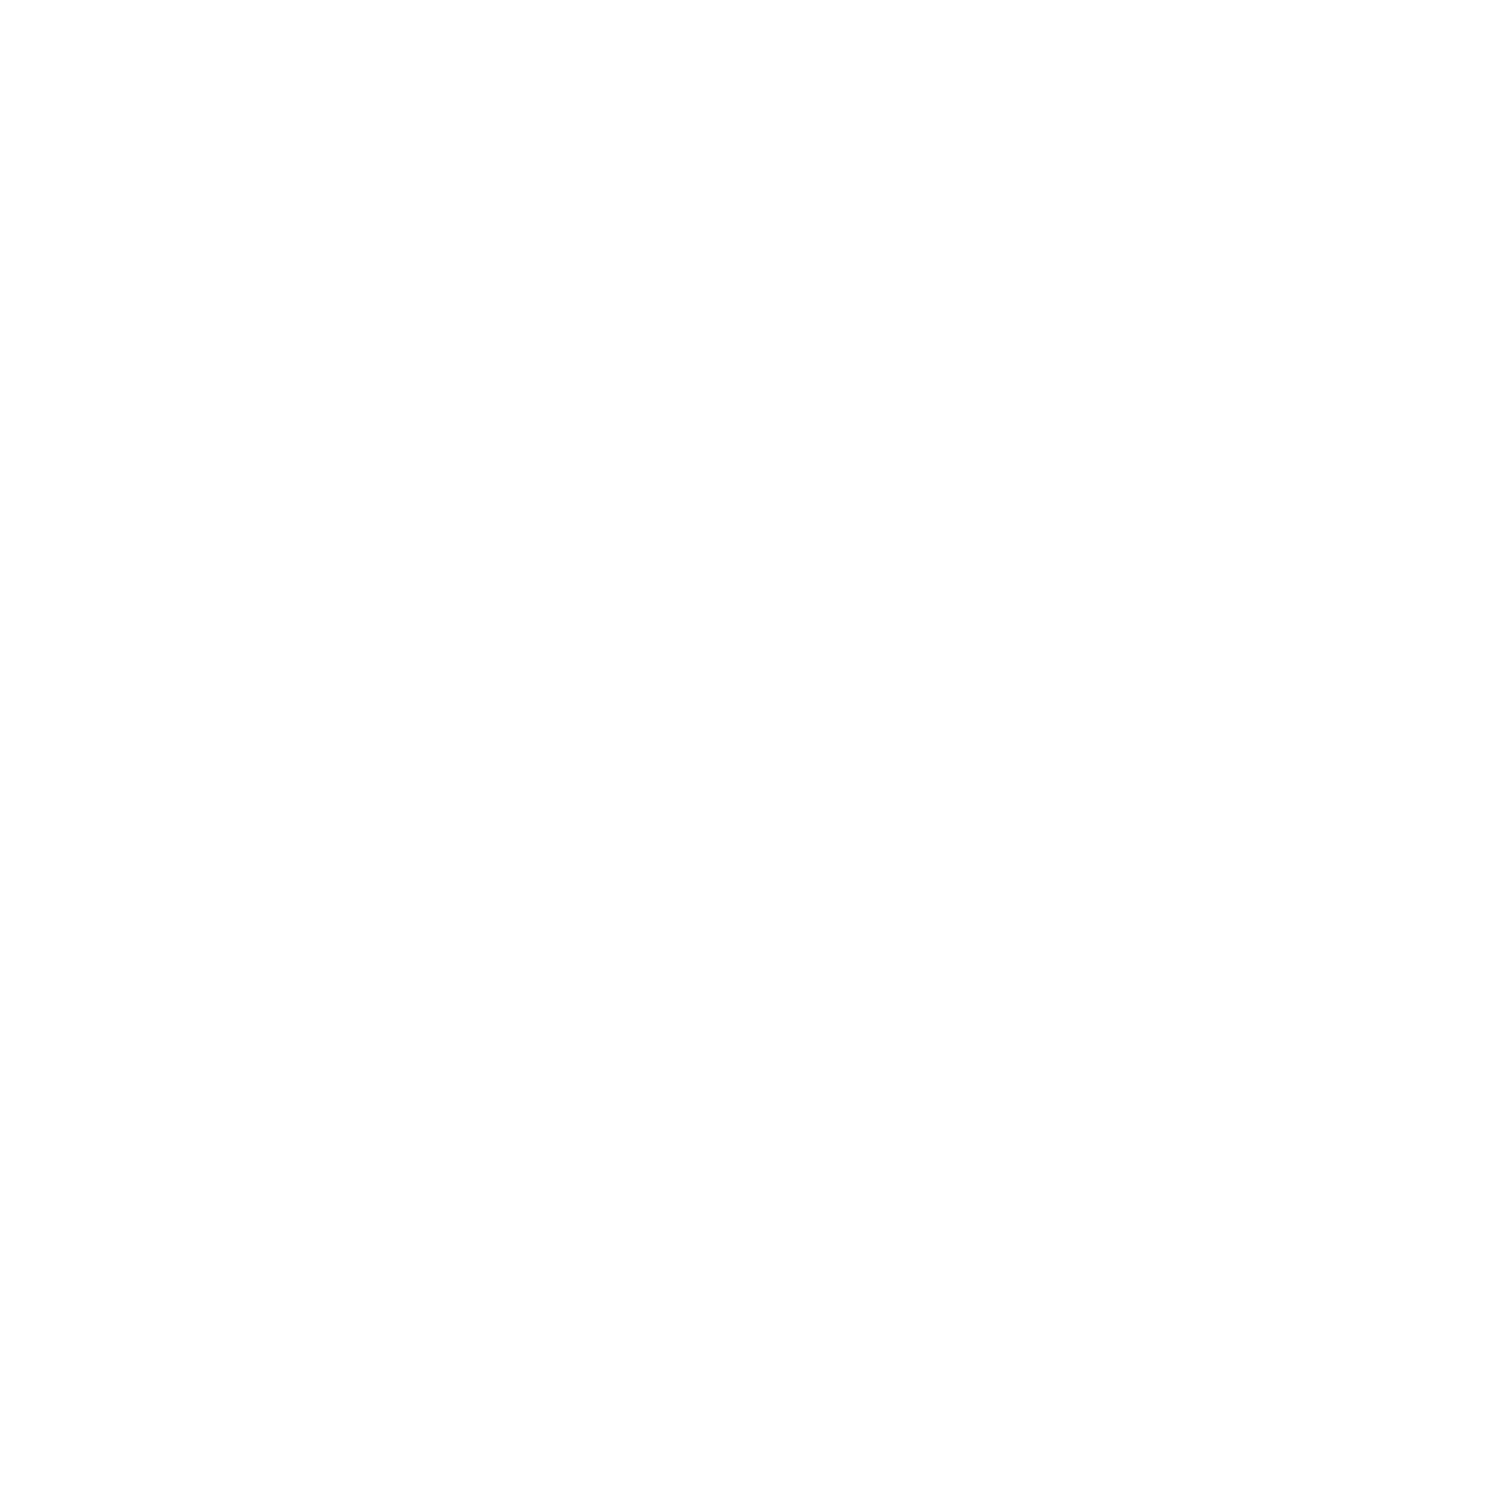 Snowflakes png images free. Clipart snowflake vector